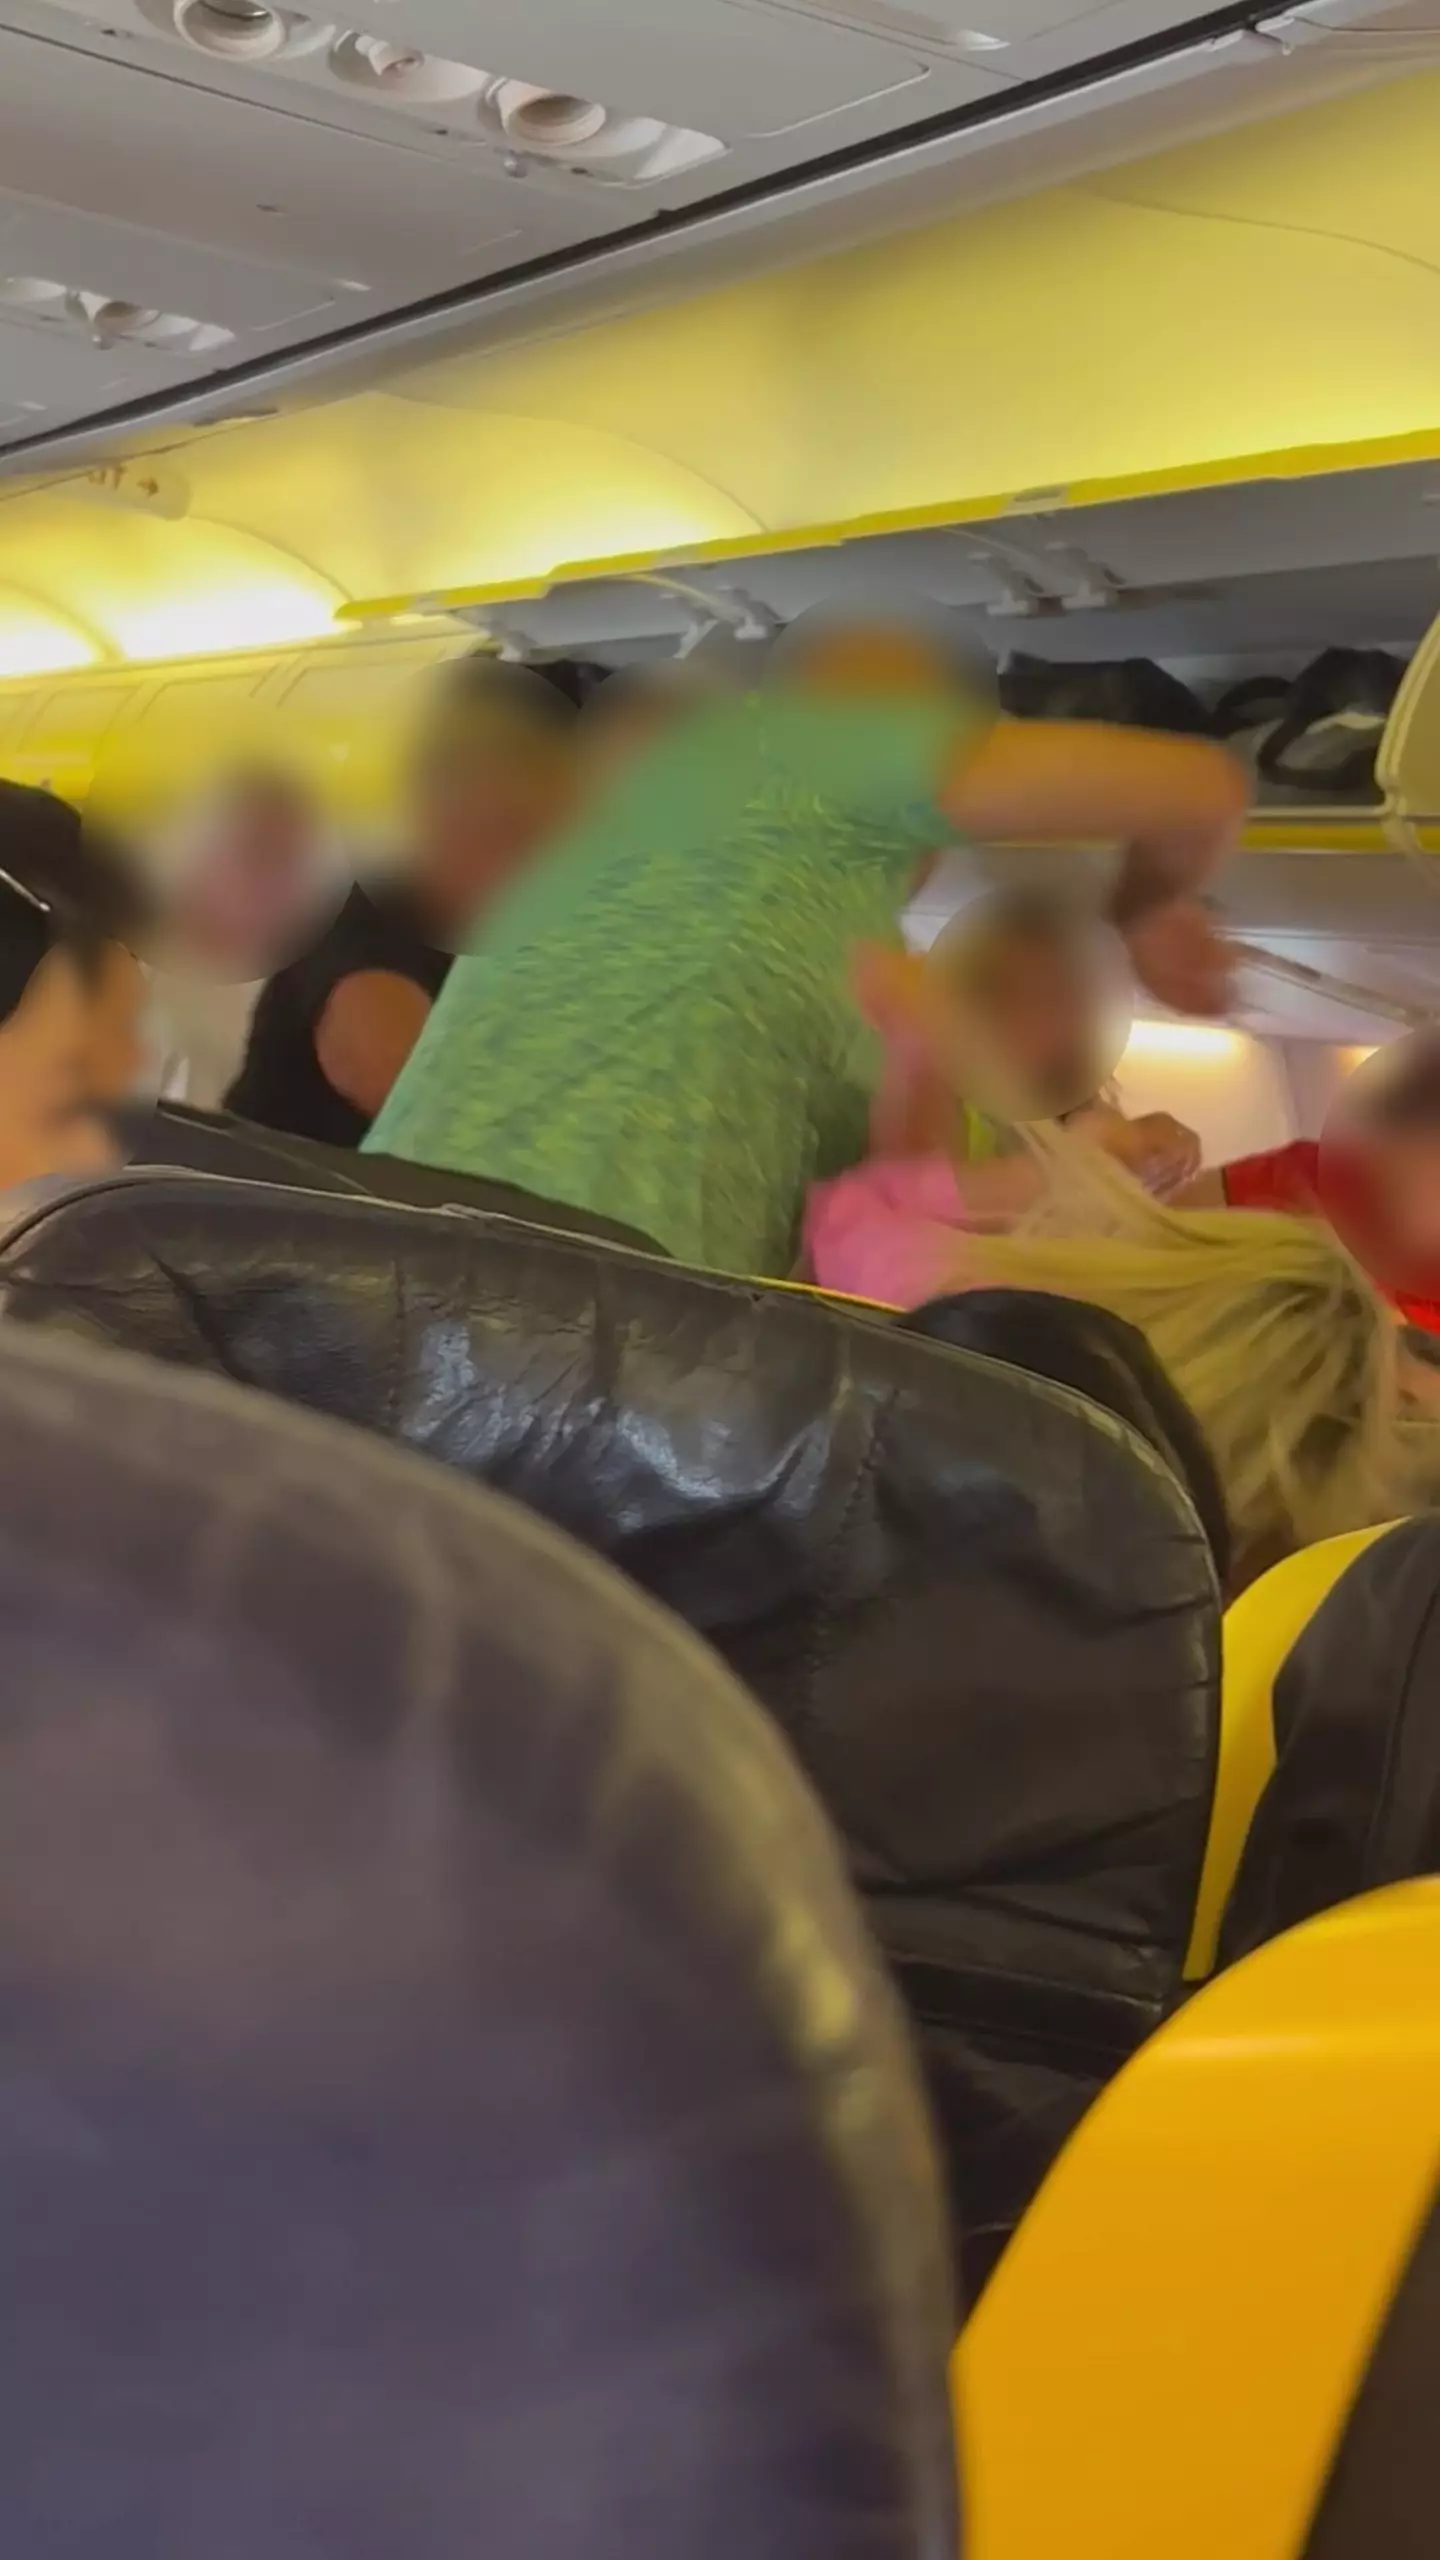 A fight broke out on the flight.